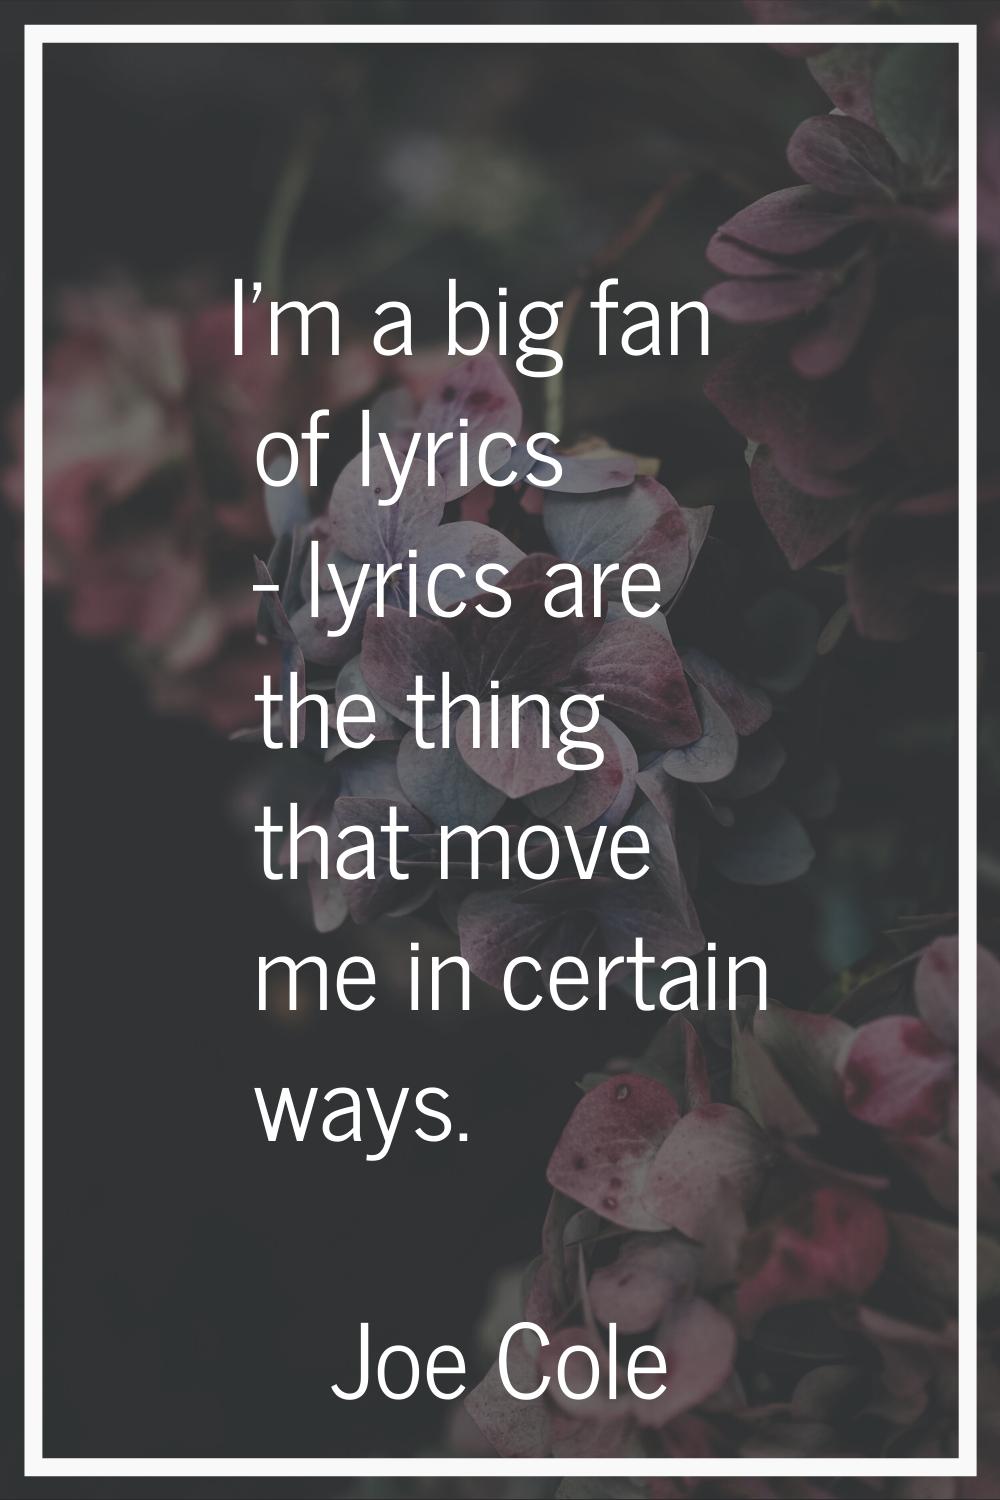 I'm a big fan of lyrics - lyrics are the thing that move me in certain ways.